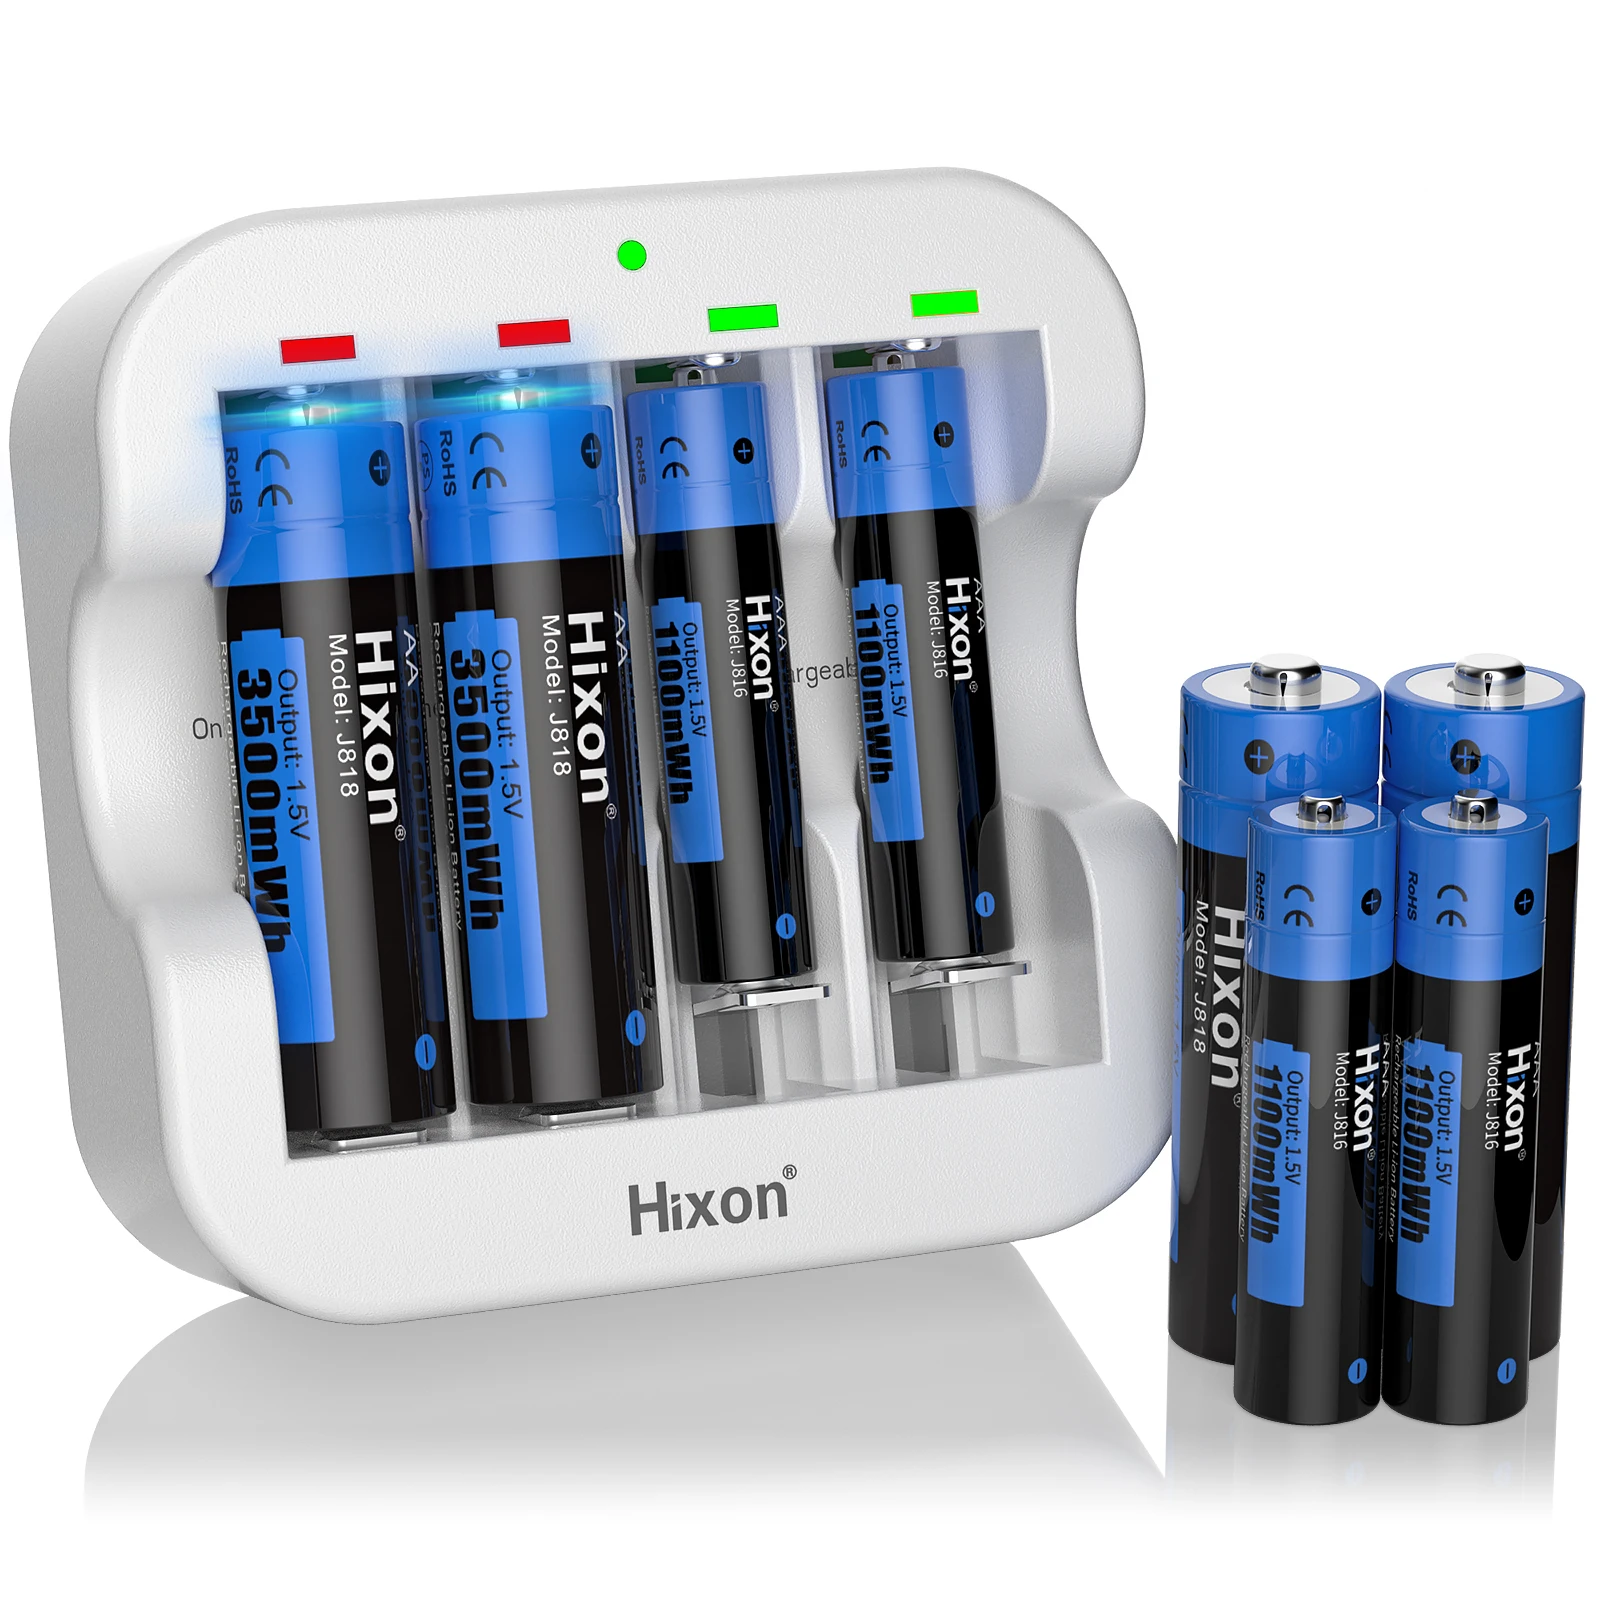 Hixon1.5V 3500mWh/1100mWh  AA & AAA Li-ion Rechargeable Battery  4 Slot Charger,  Electronic Toys, Remote Controls, Cameras